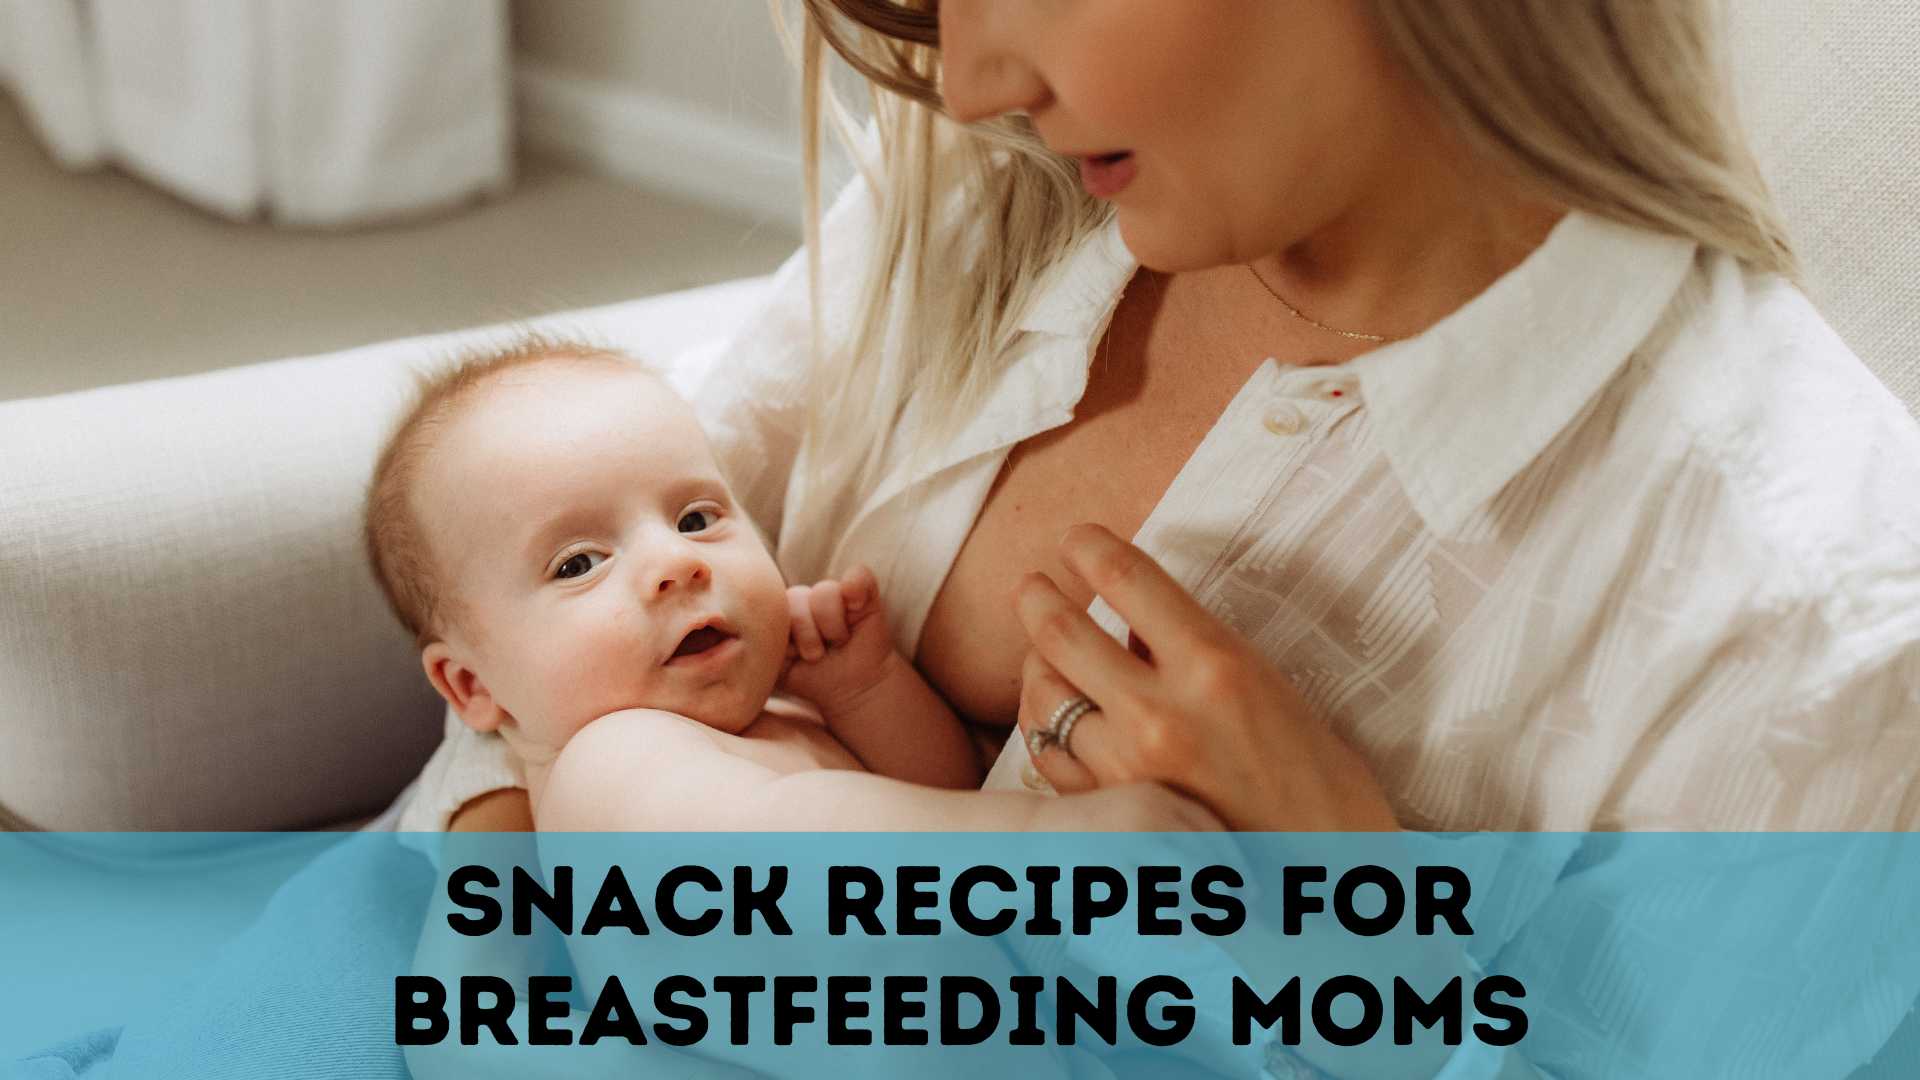 10 Breastfeeding Must-Haves for Mom - Pretty Passive